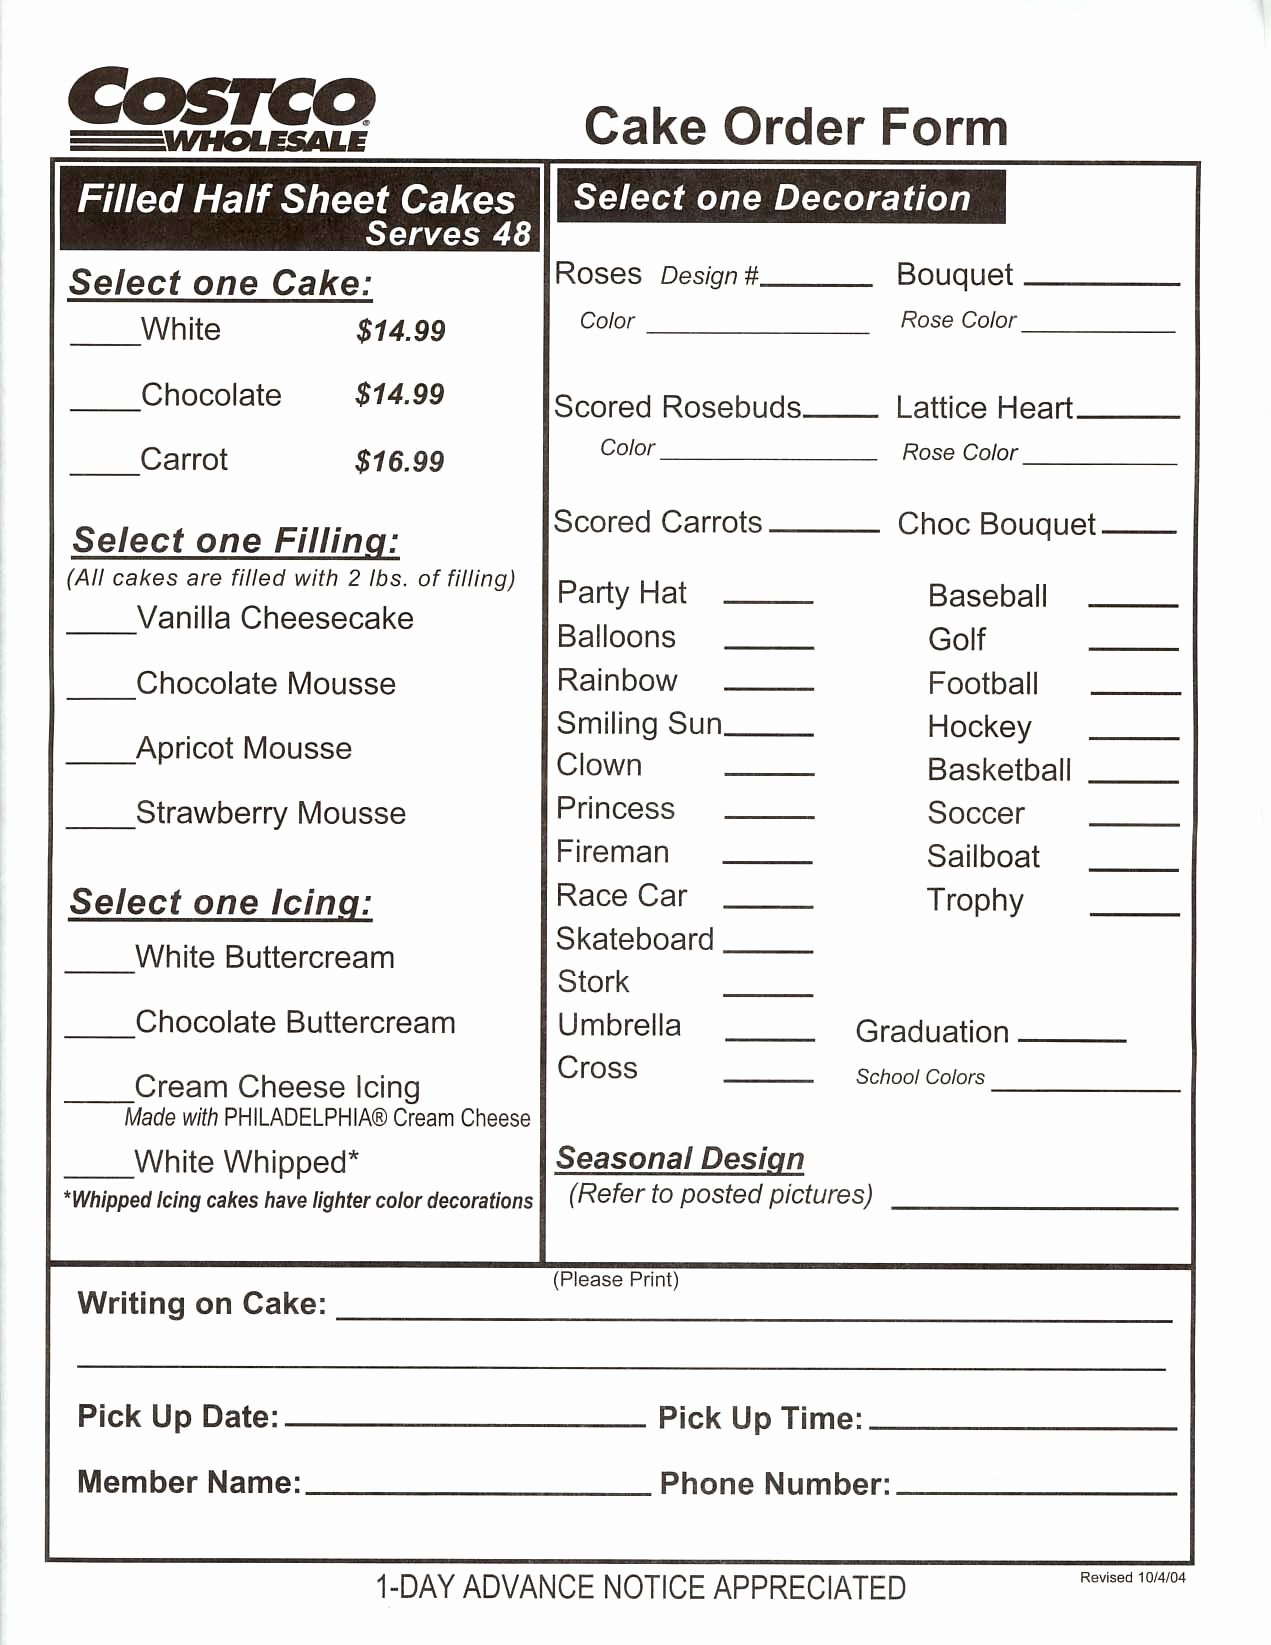 Cake order forms Templates Unique Re Costco Cakesneed some Info Cakepins